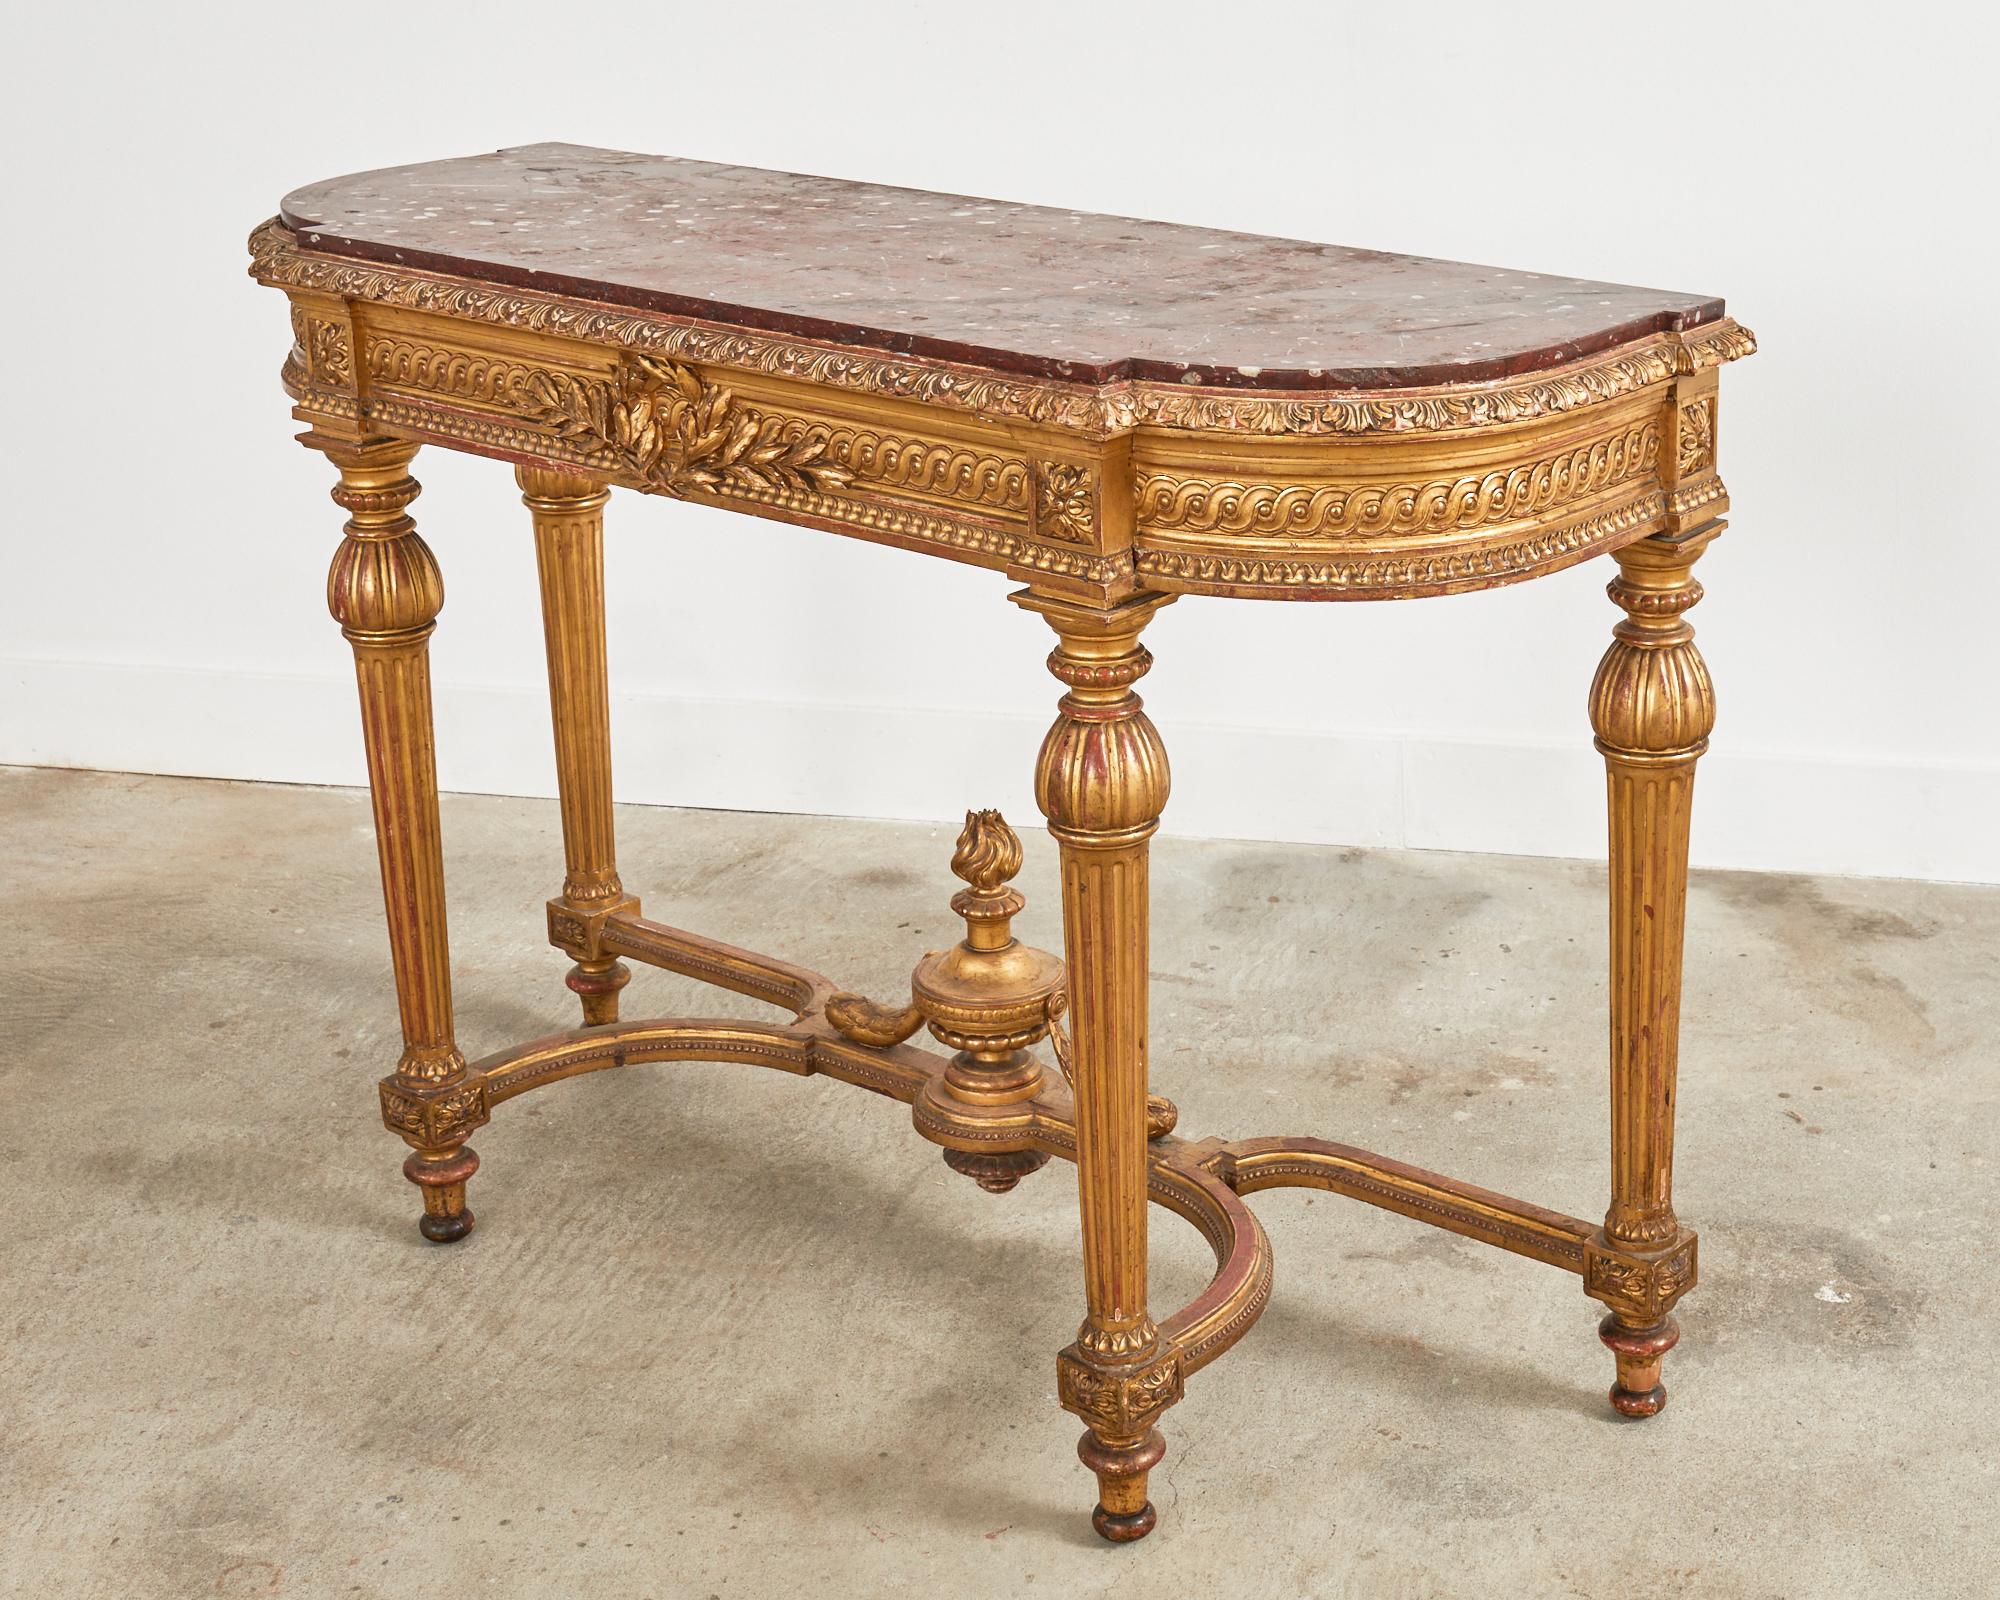 Hand-Crafted 19th Century French Empire Neoclassical Marble Top Console Table For Sale